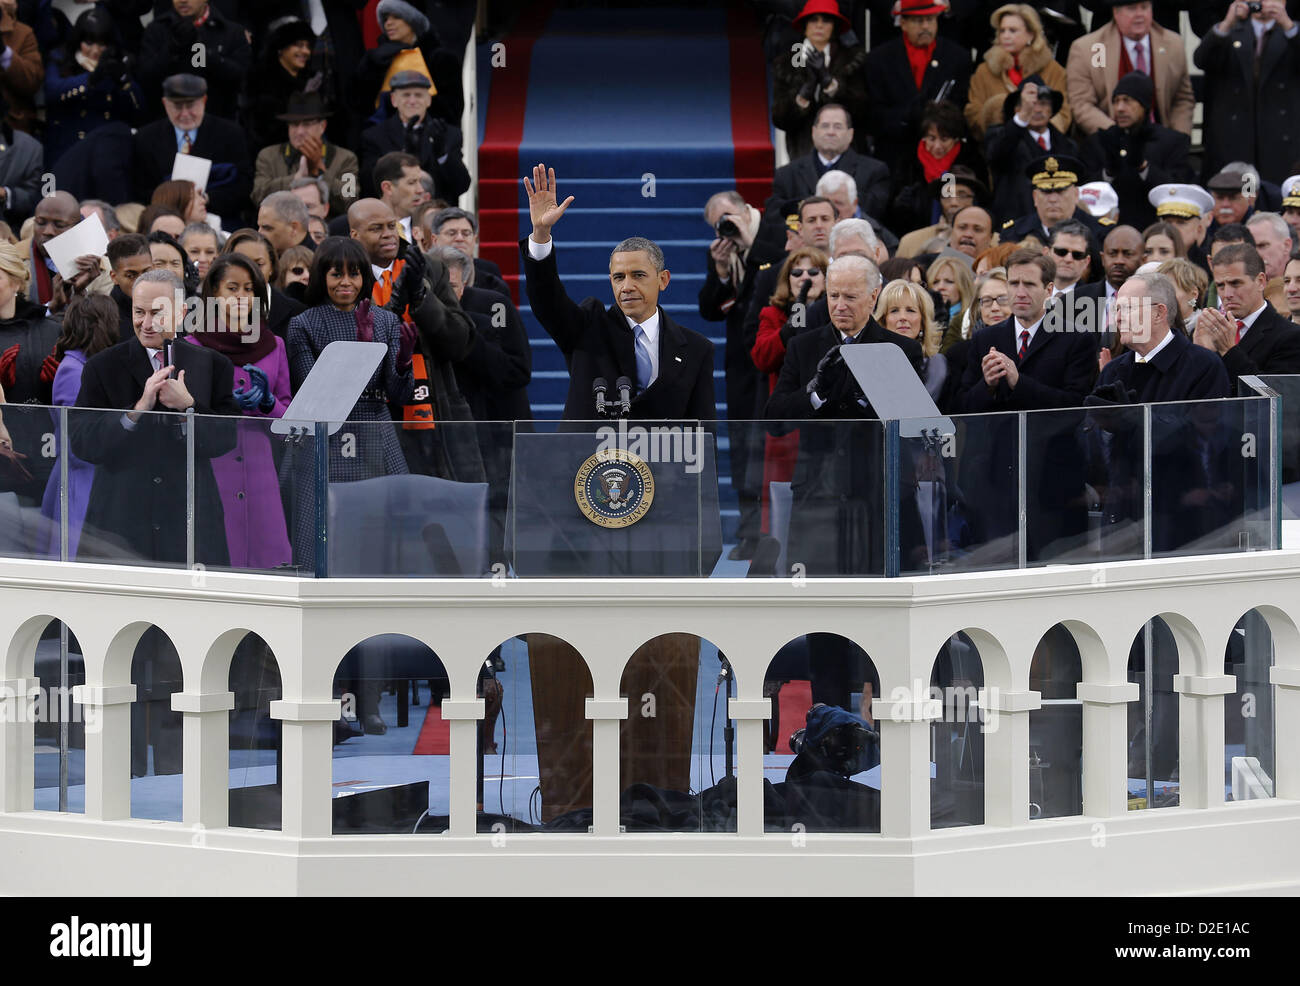 Jan. 21, 2013 - Washington, District of Columbia, U.S. - President BARACK OBAMA waves to the crowd after his Inaugural speech at the ceremonial swearing-in on the West Front of the U.S. Capitol during the 57th Presidential Inauguration. (Credit Image: © Scott Andrews/Pool/Prensa Internacional/ZUMAPRESS.com) Stock Photo